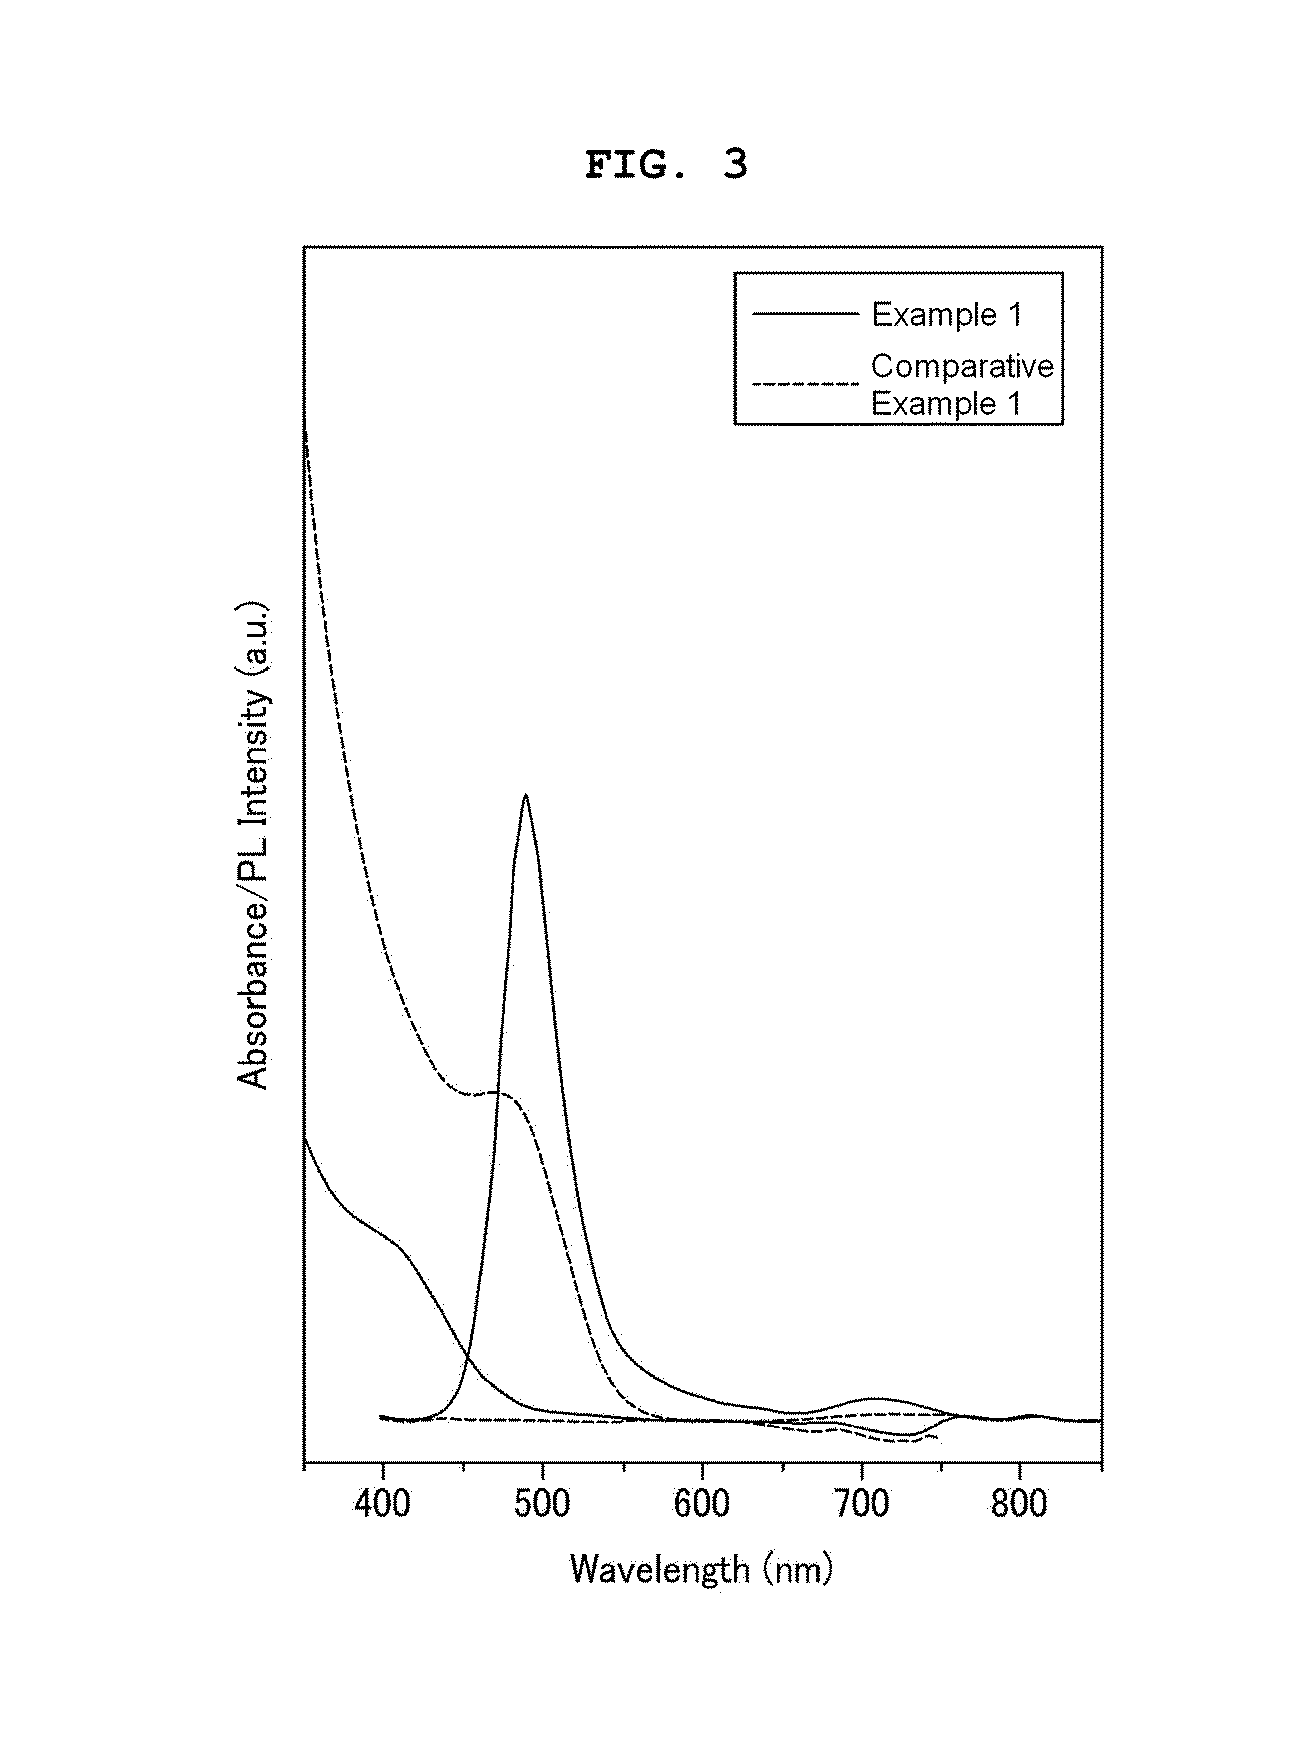 Preparation method of nanocrystals coated with metal-surfactant layers